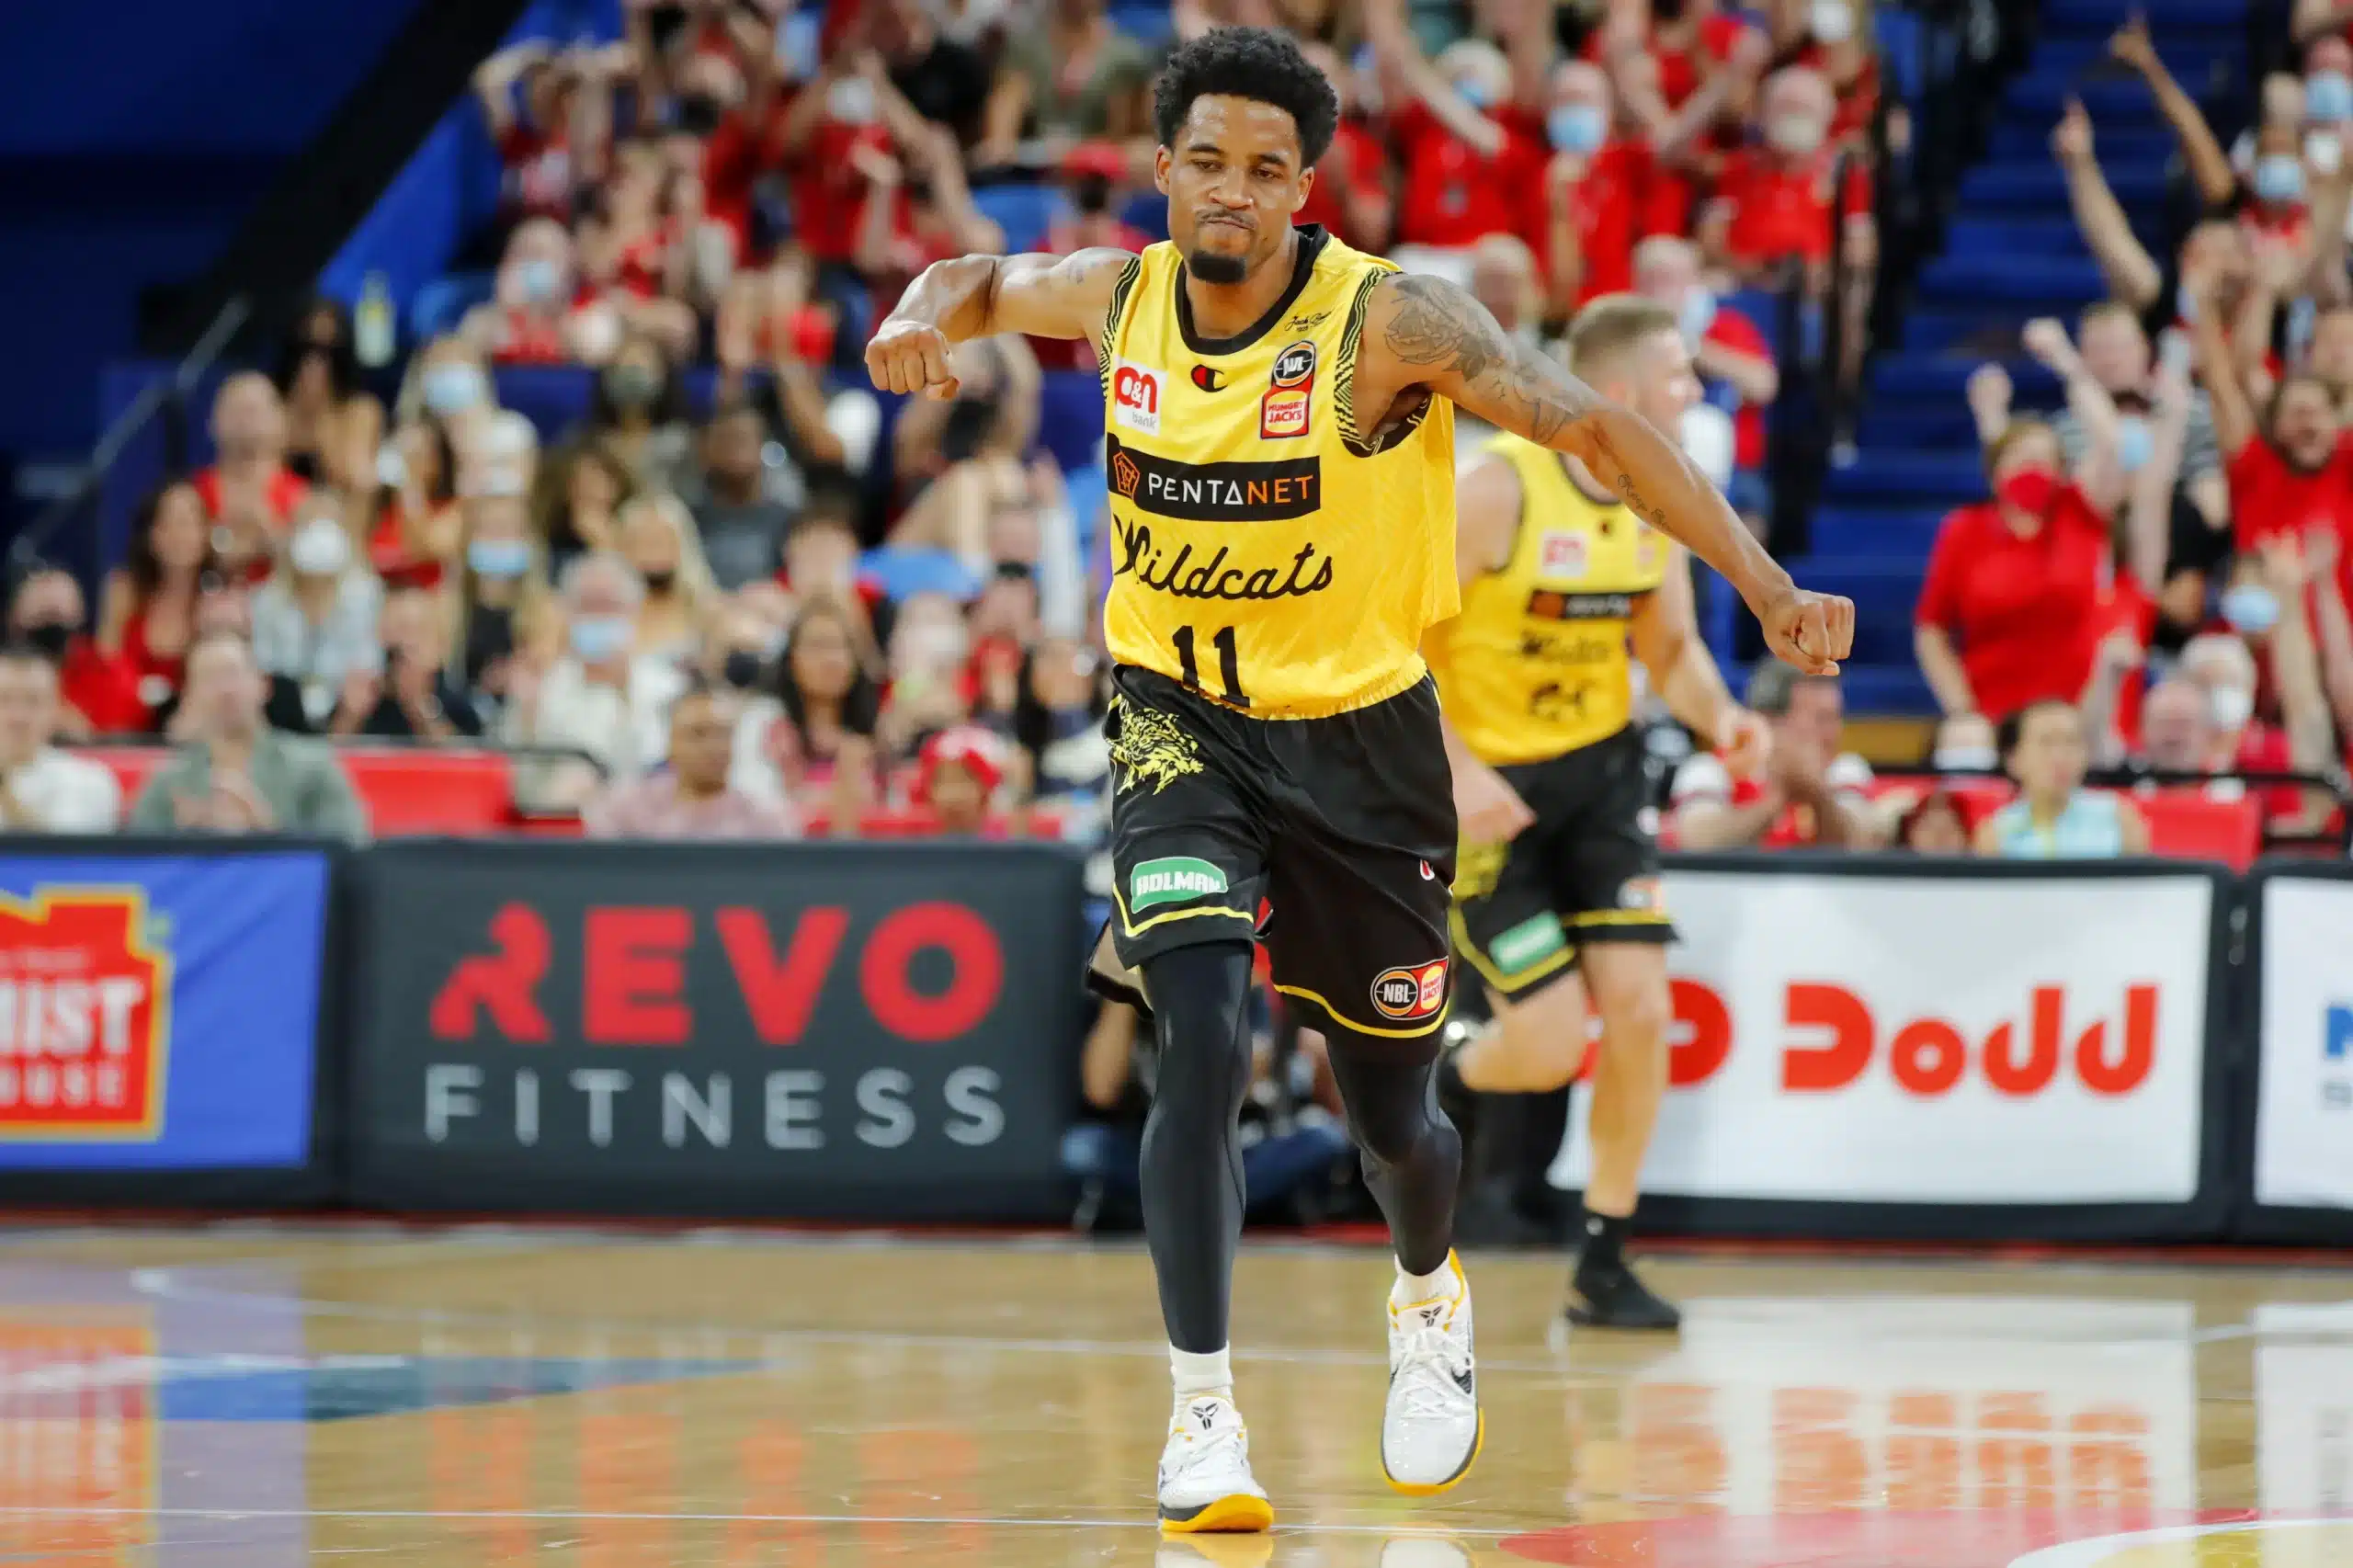 PERTH, AUSTRALIA - APRIL 16: Bryce Cotton of the Wildcats celebrates after making a three point shot during the round 20 NBL match between Perth Wildcats and Cairns Taipans at RAC Arena on April 16, 2022, in Perth, Australia. (Photo by James Worsfold/Getty Images)